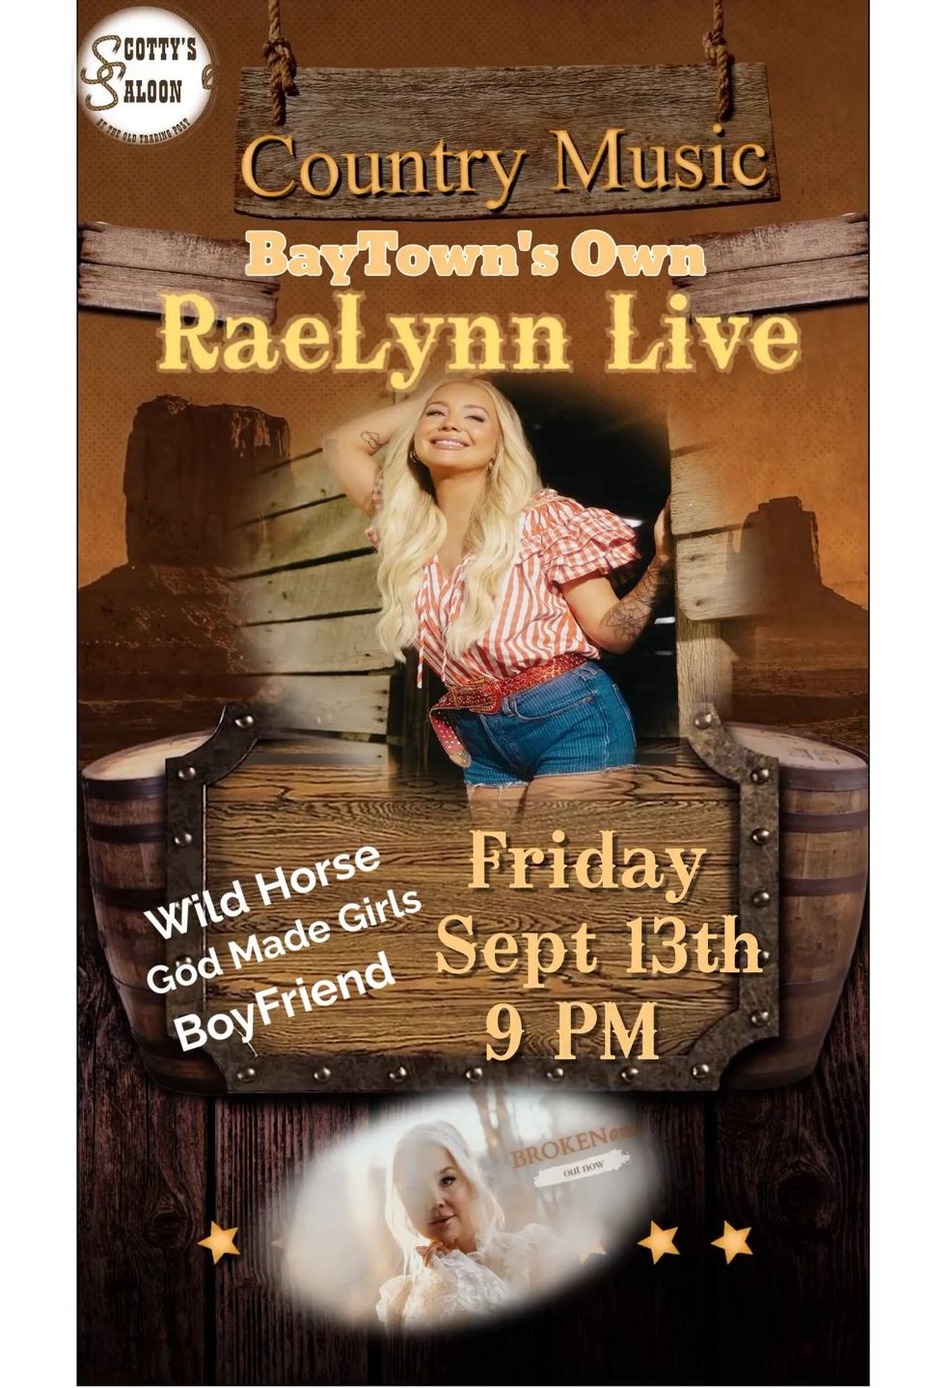 RaeLynn Live at Scotty's Saloon event photo